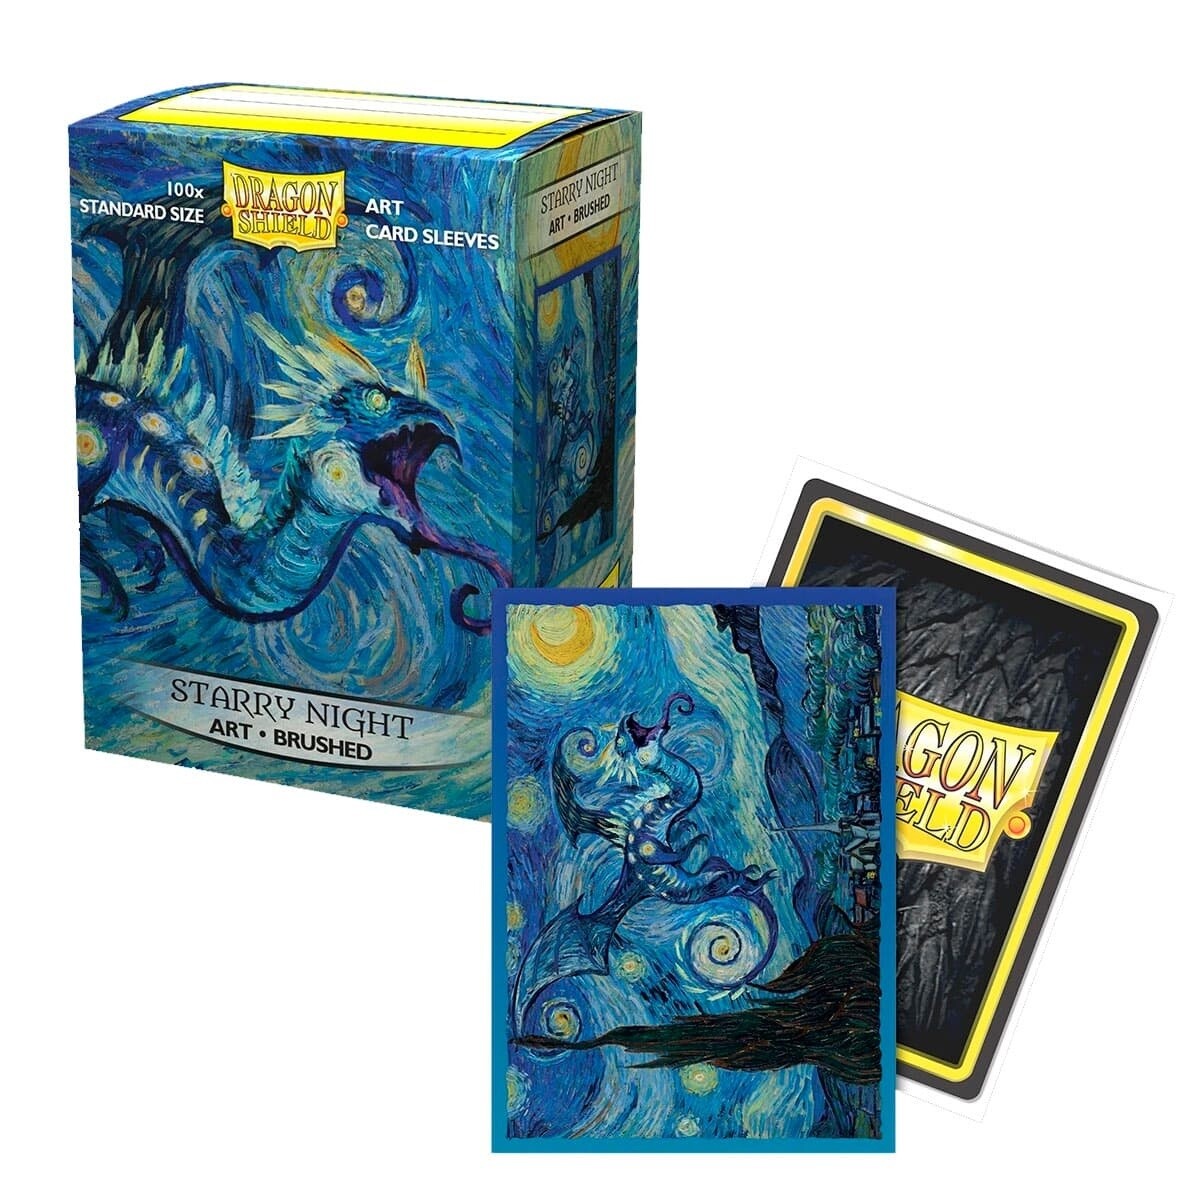 Dragon Shield 100ct Box - Dragons in Art - Starry Night Brushed Art Sleeves